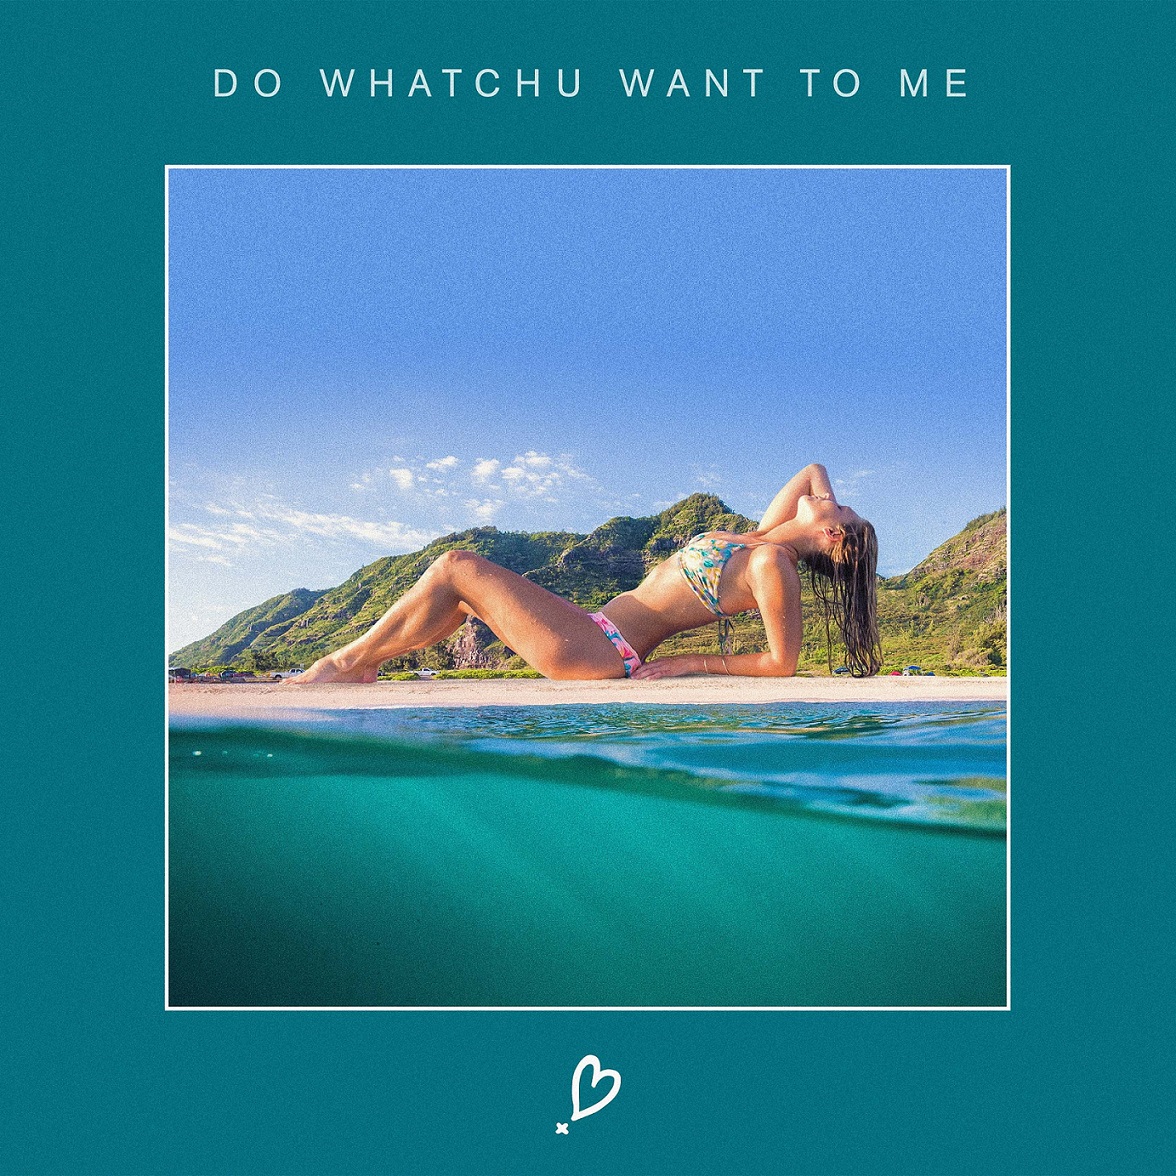 Do Whatchu Want to Me - NoMBe single art